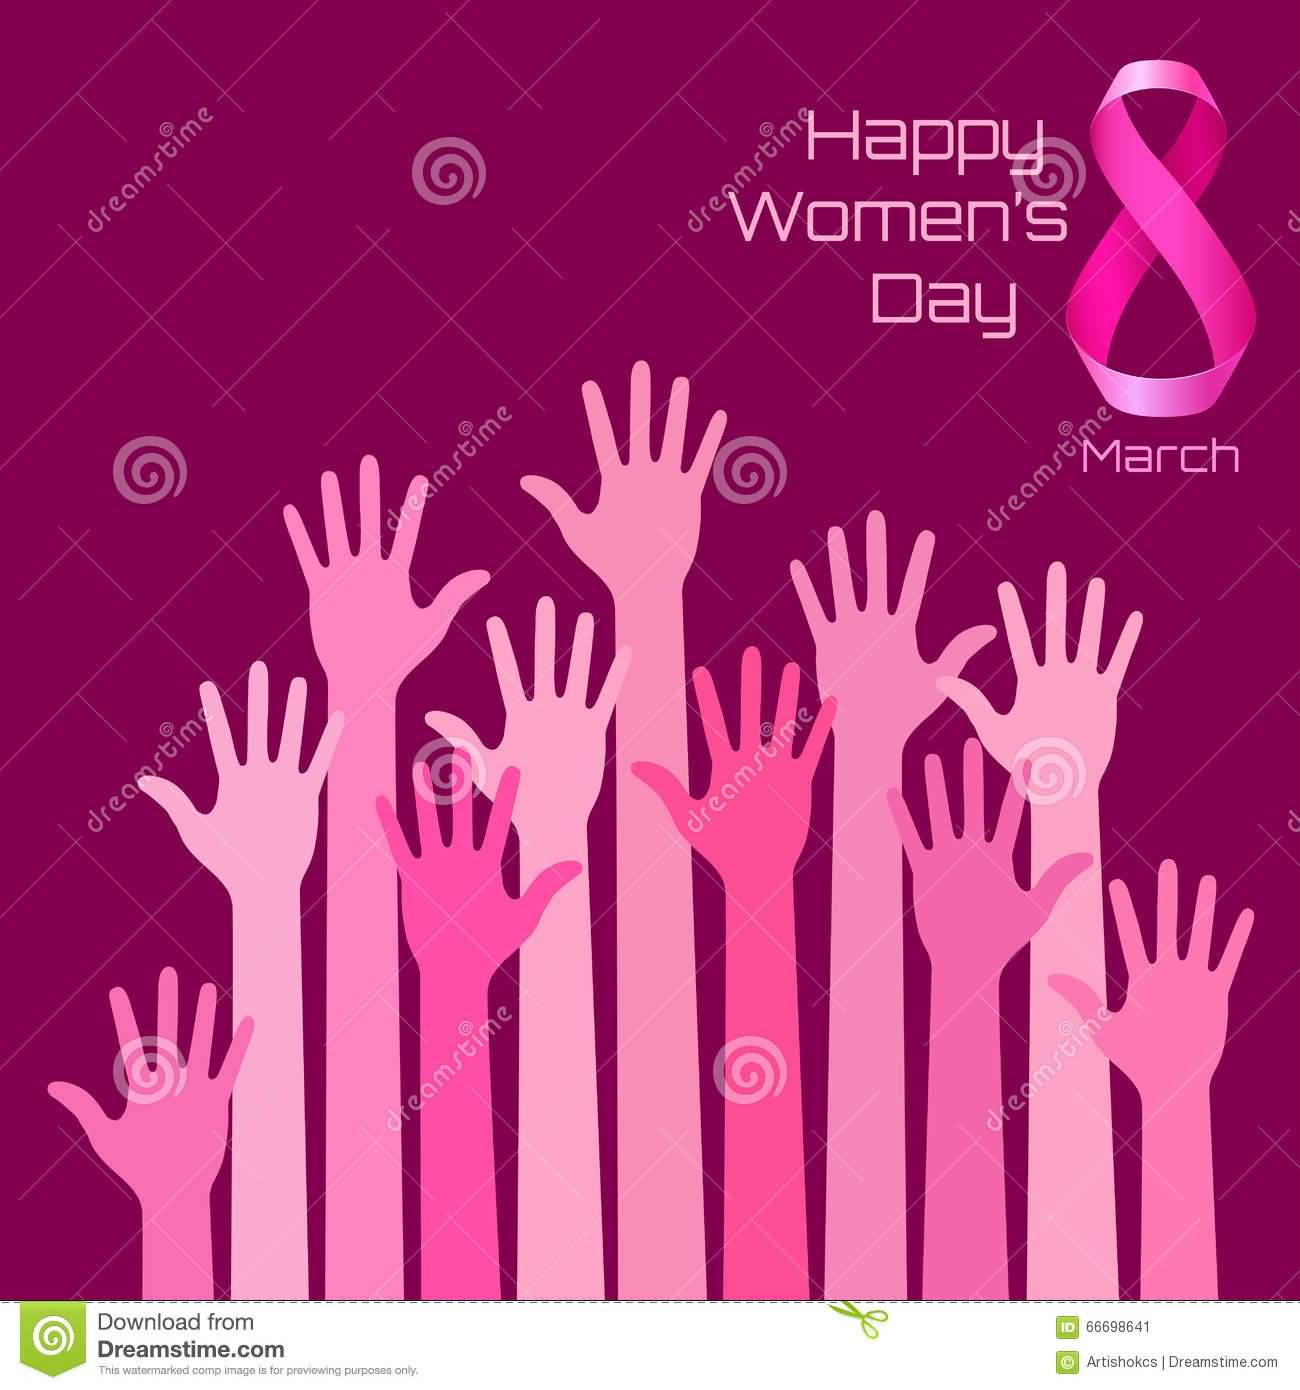 Happy Women's Day 8 March Pink Hands Greeting Card Design